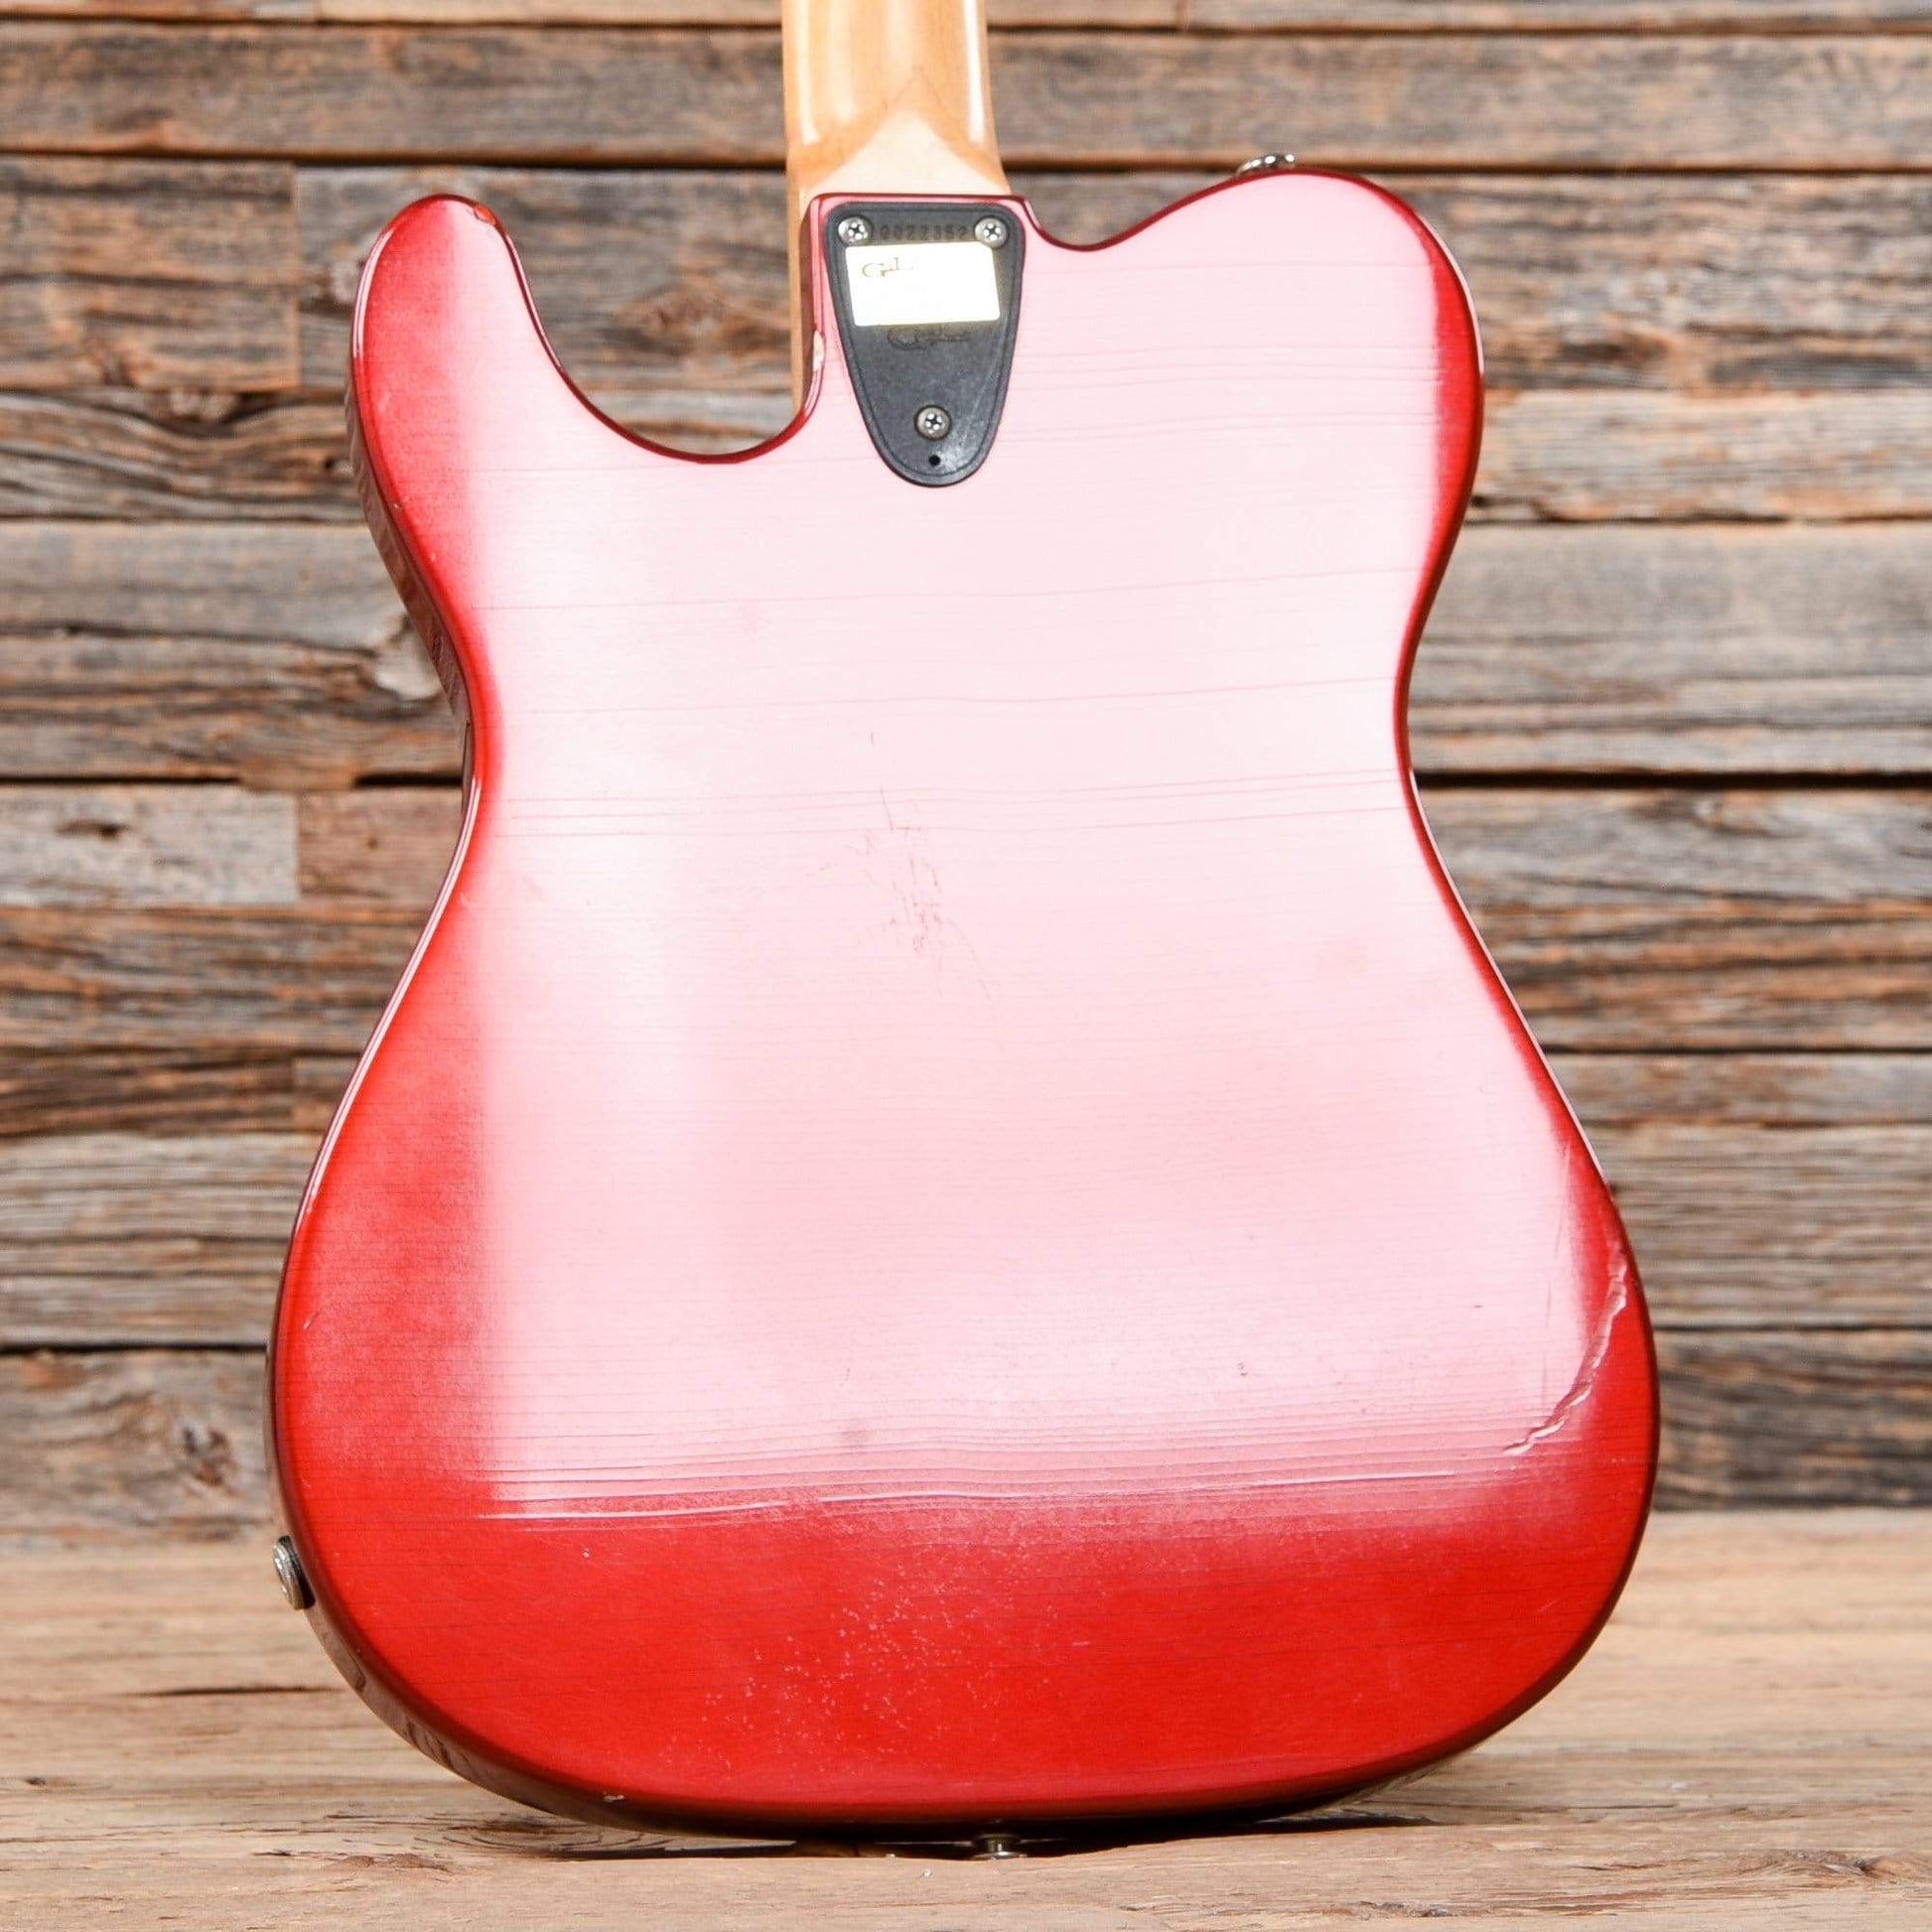 G&L ASAT Candy Apple Red 1988 Electric Guitars / Solid Body